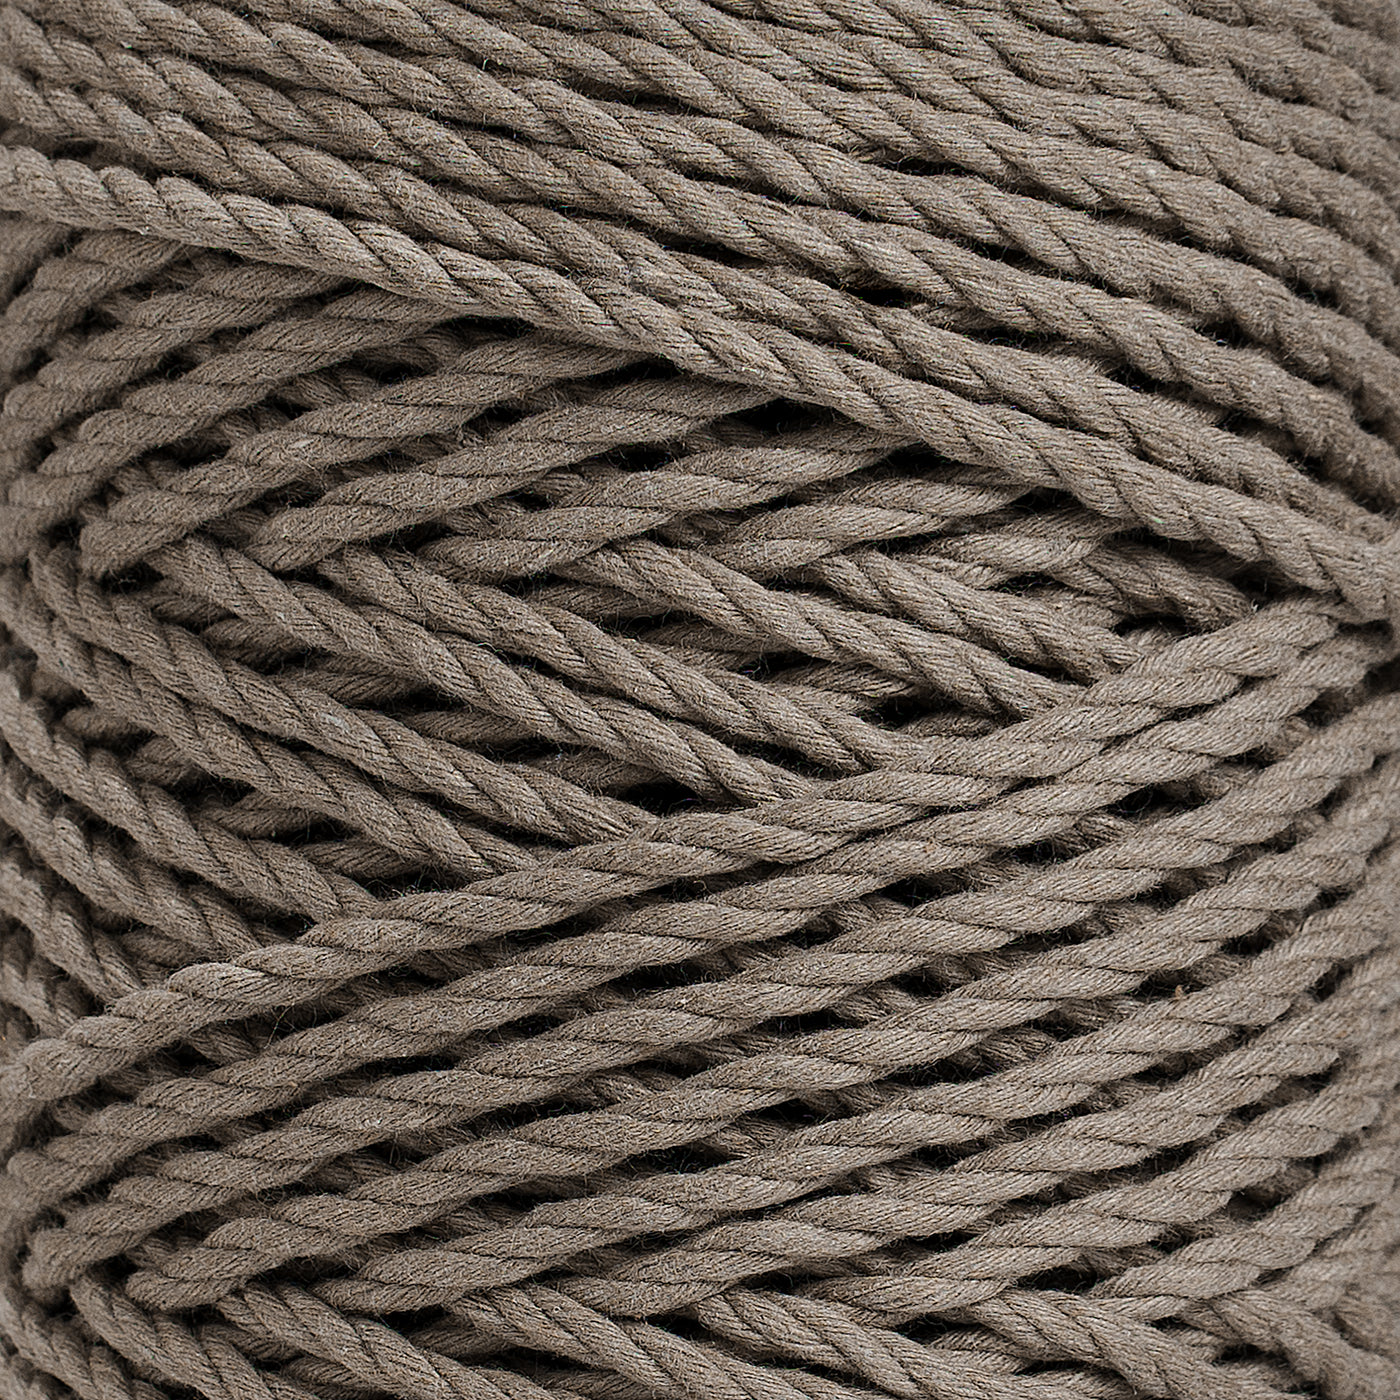 COTTON ROPE ZERO WASTE 3 MM - 3 PLY - CHESTNUT COLOR